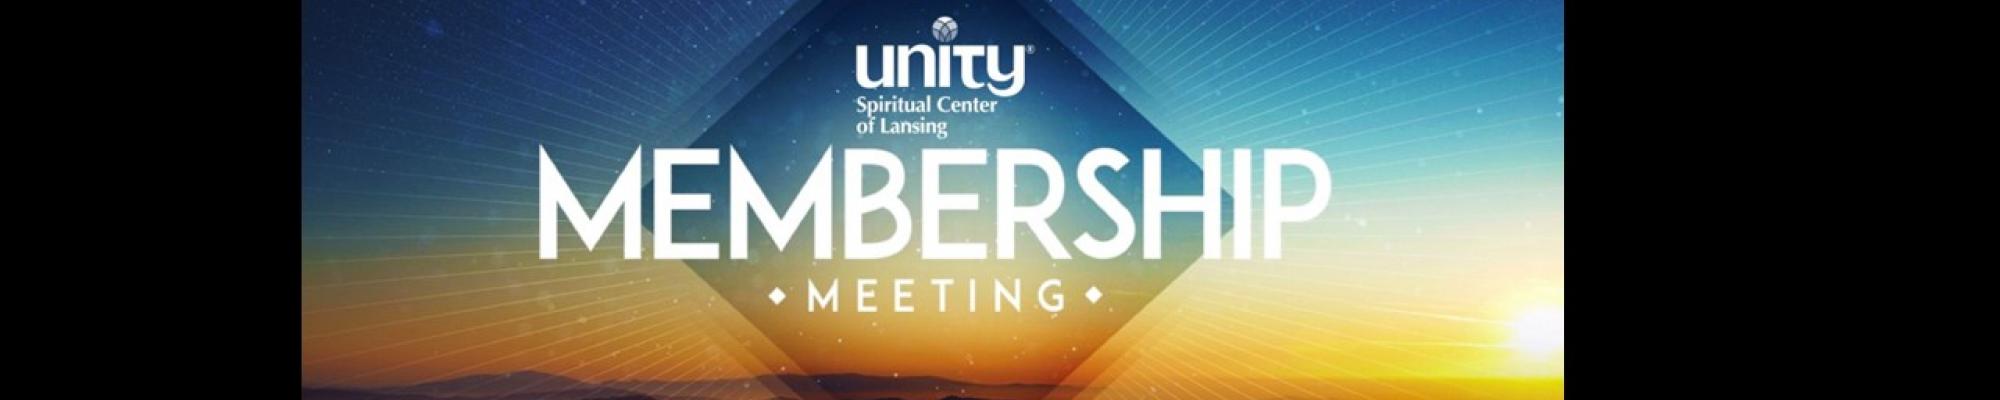 colors of sunrise with word "Annual Unity Membership Meeting"